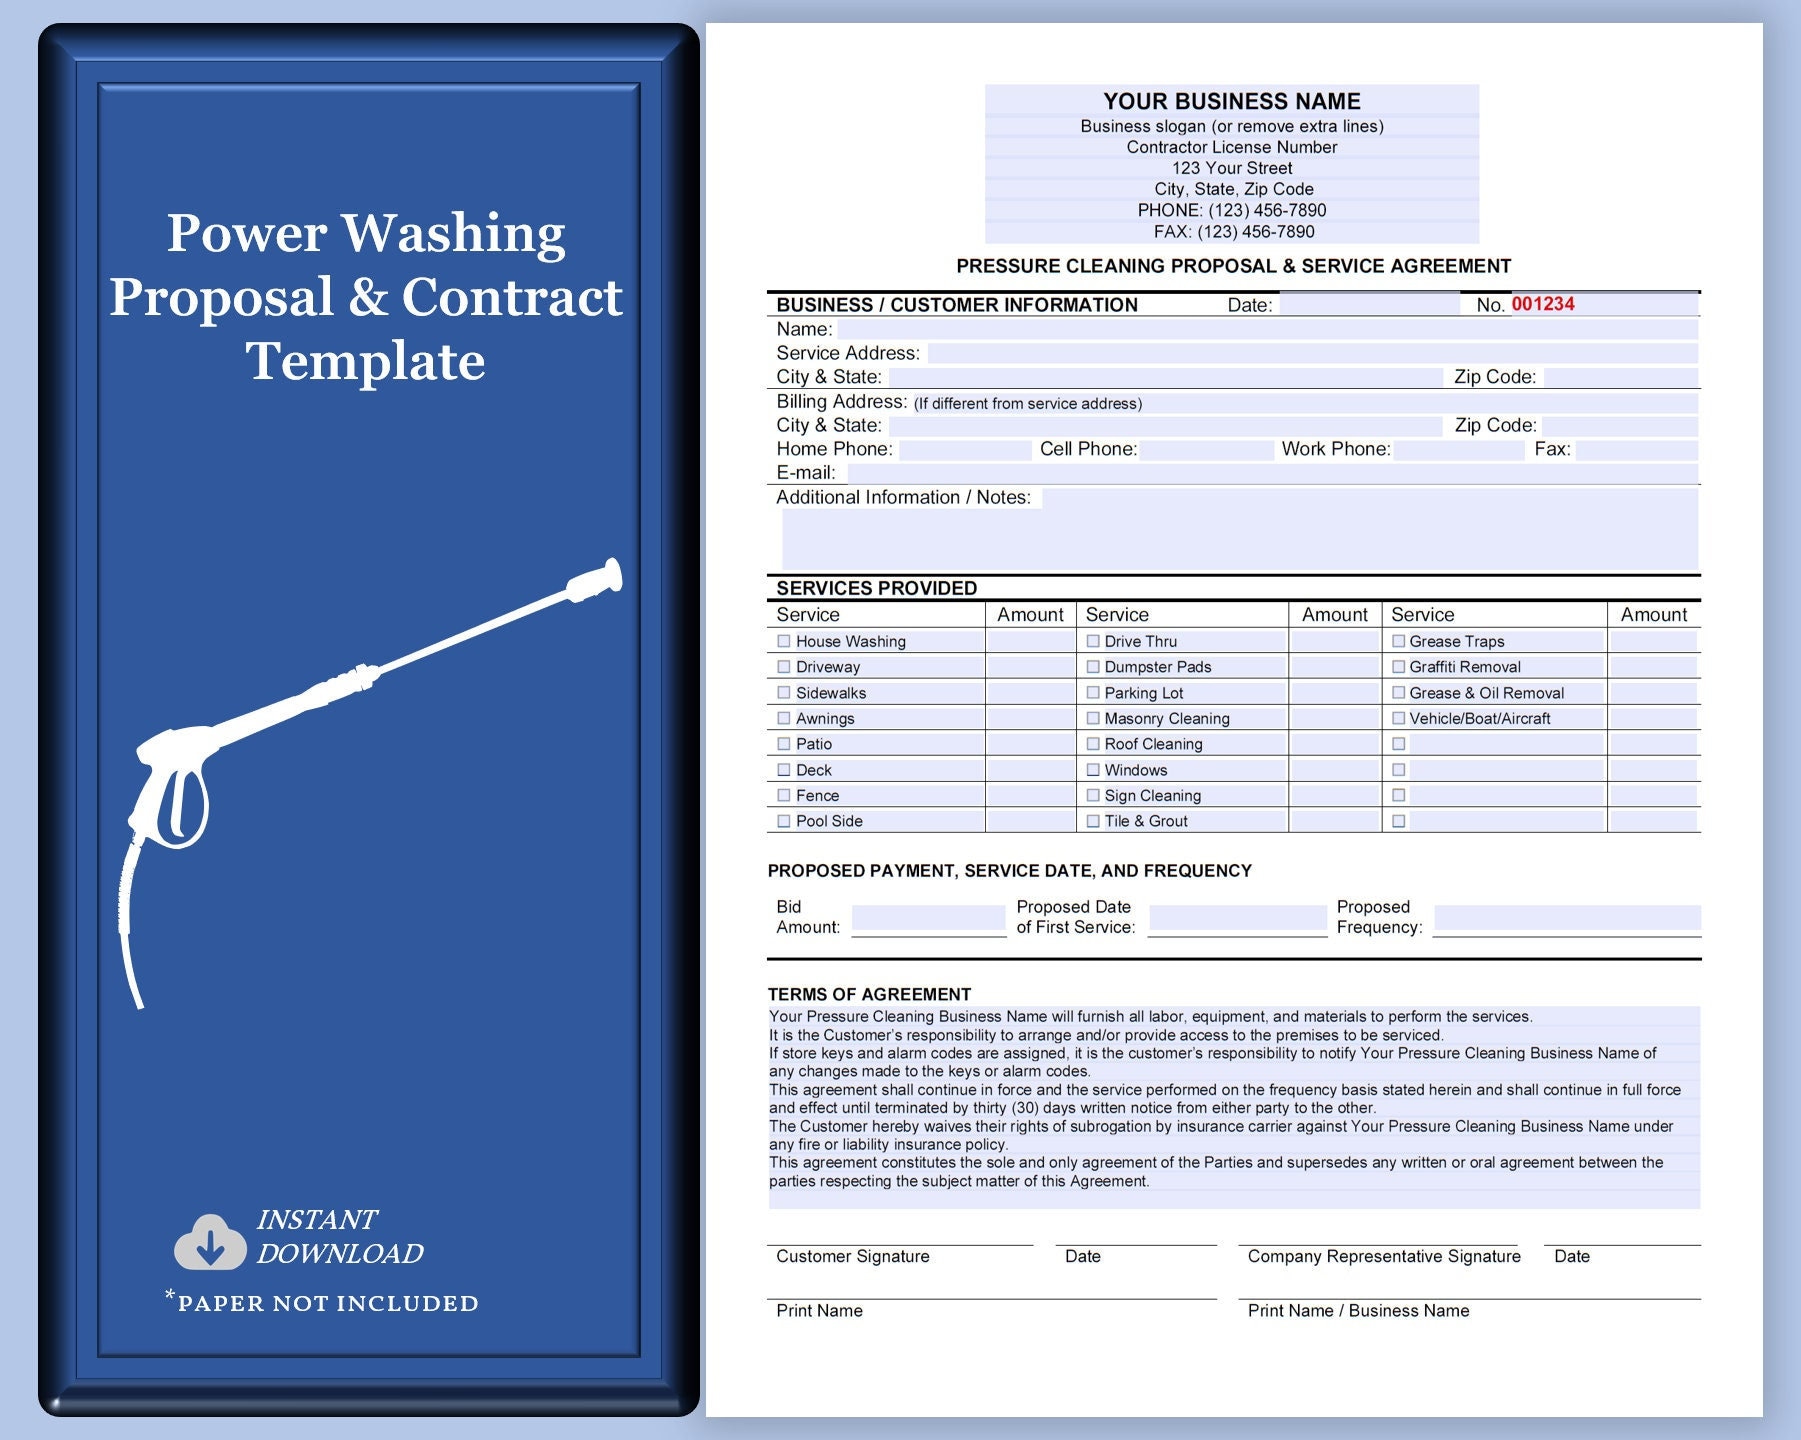 power-washing-proposal-agreement-contract-template-instant-download